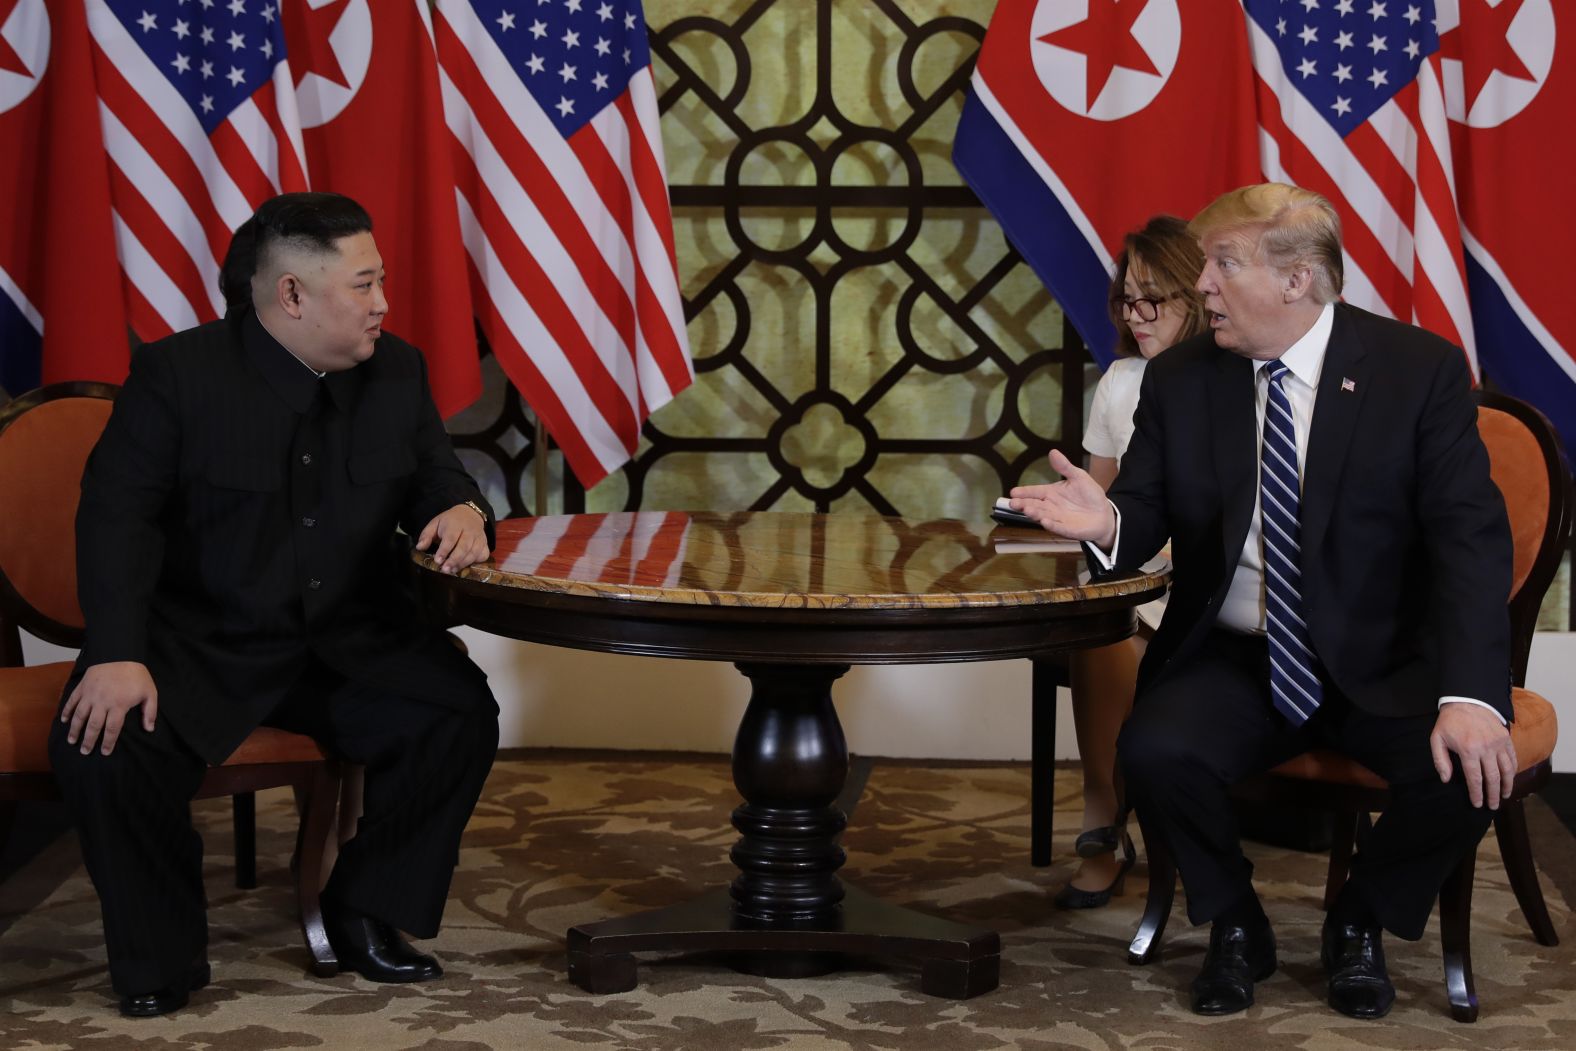 Kim and Trump are joined by translators as they meet at the start of the summit's second day. <a href="index.php?page=&url=https%3A%2F%2Fwww.cnn.com%2Fpolitics%2Flive-news%2Ftrump-kim-jong-un-summit-vietnam-february-2019%2Fh_5a896533f8fb45c3ebb810cd3e88adb8" target="_blank">Kim told the reporters there</a> that many people had been "skeptical" about the two leaders meeting. "I'm sure all of them will be watching the moment we are sitting together, side by side, as if they are watching a fantasy movie," he said.